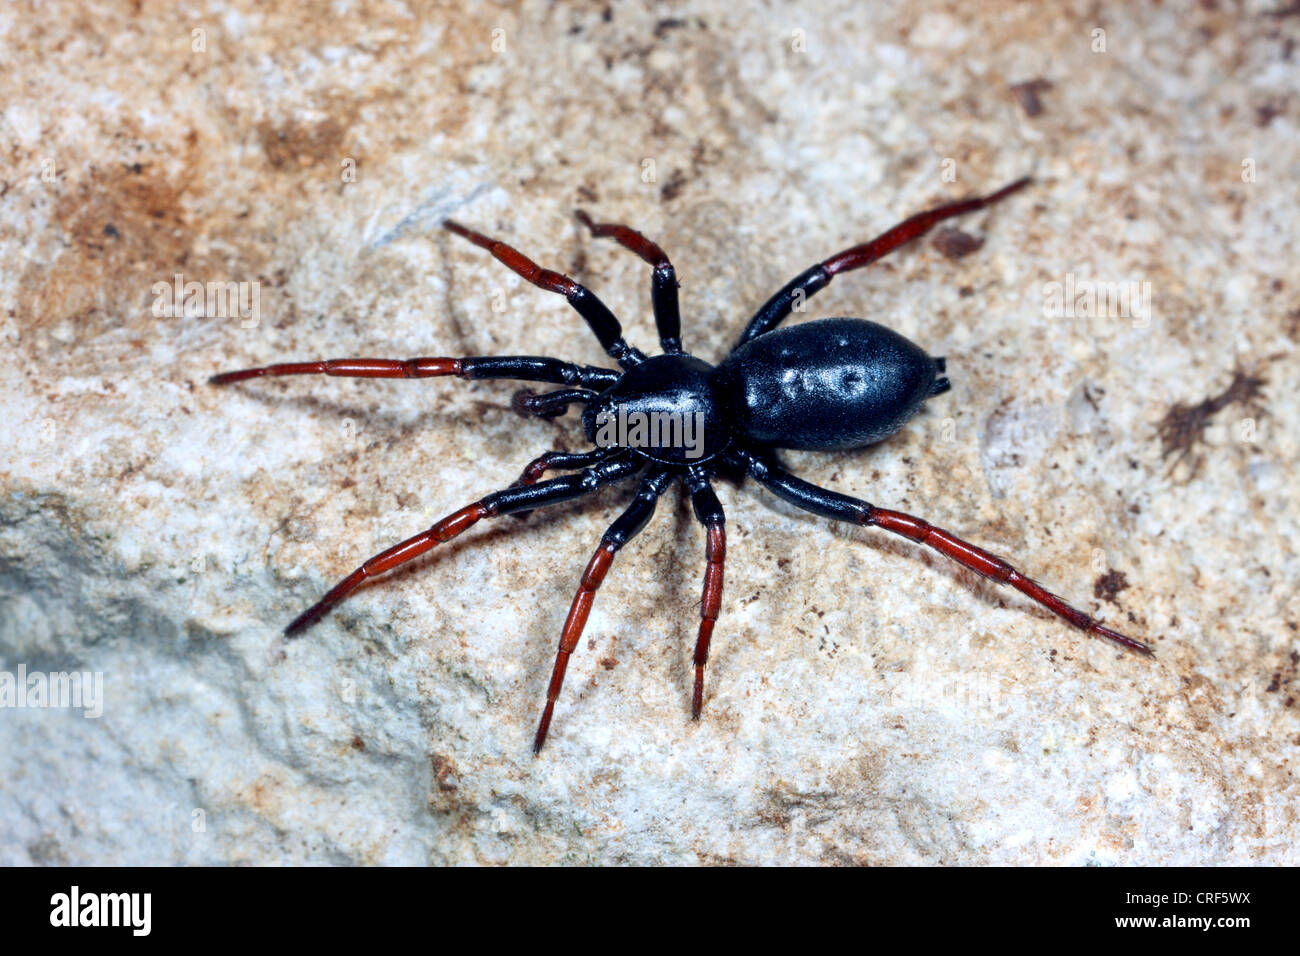 Ground spider (Zelotes pedestris), male sitting on a stone Stock Photo